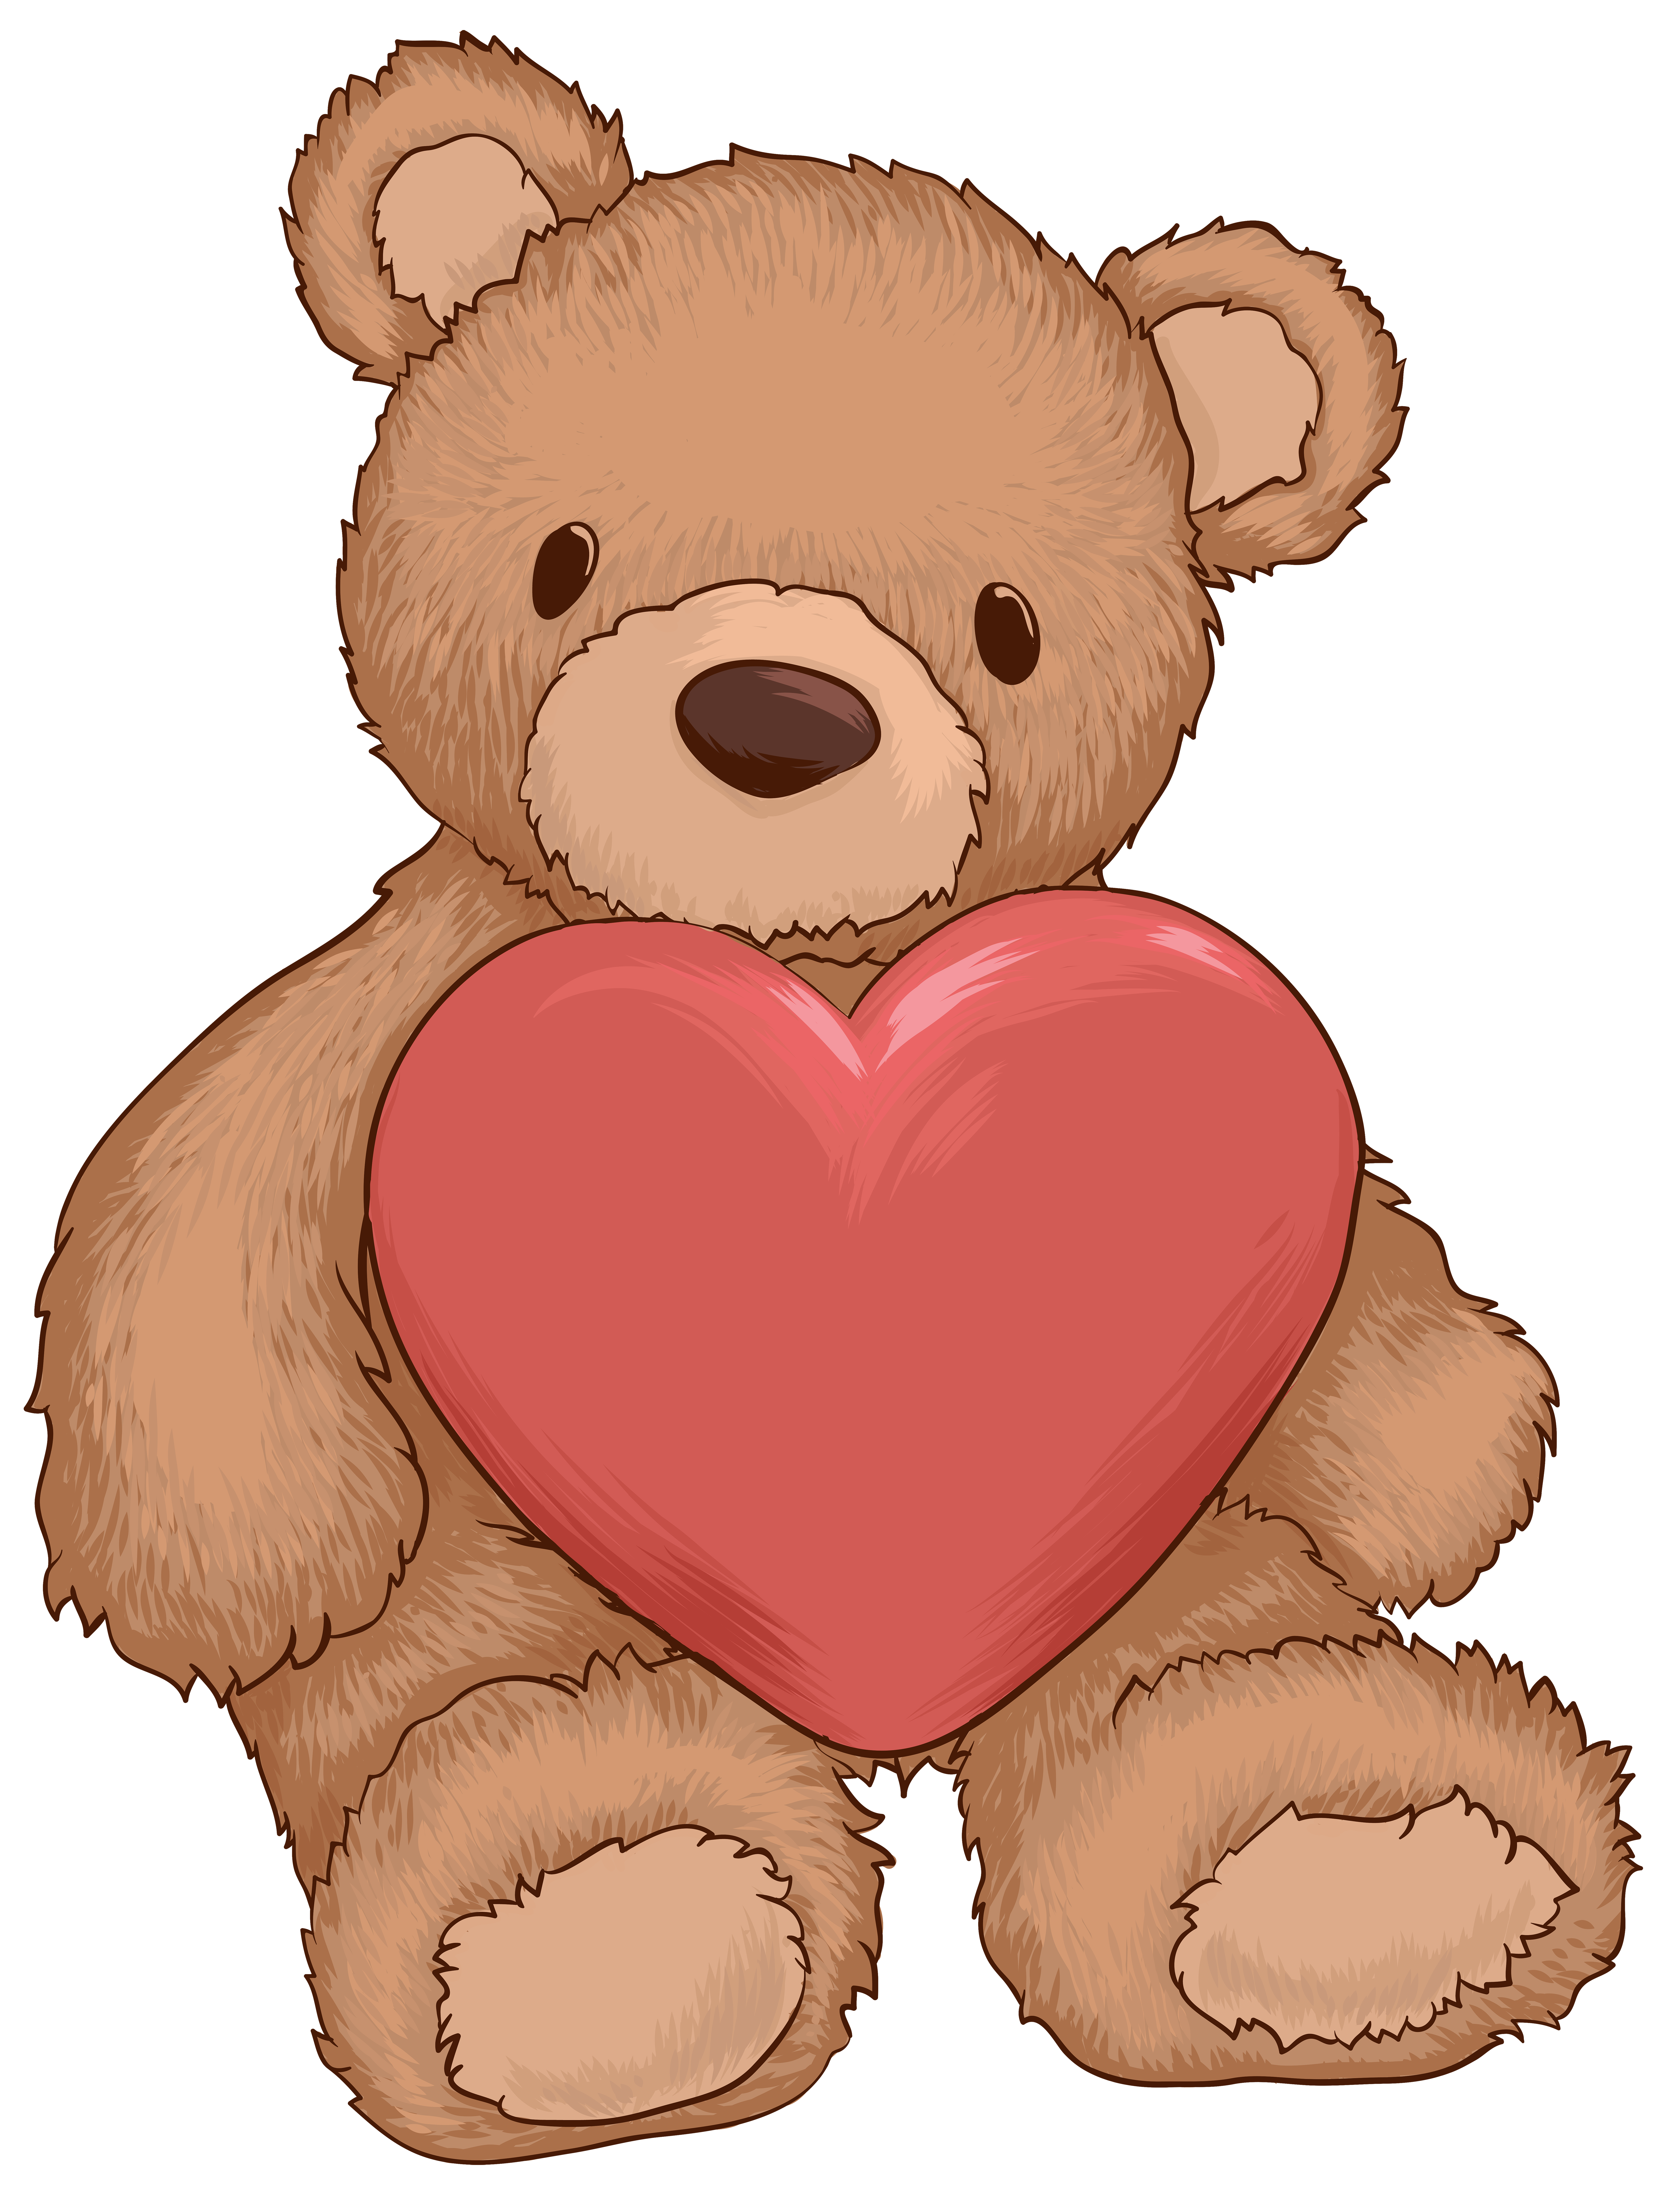 Teddy Bear with Heart PNG Clip Art Image.